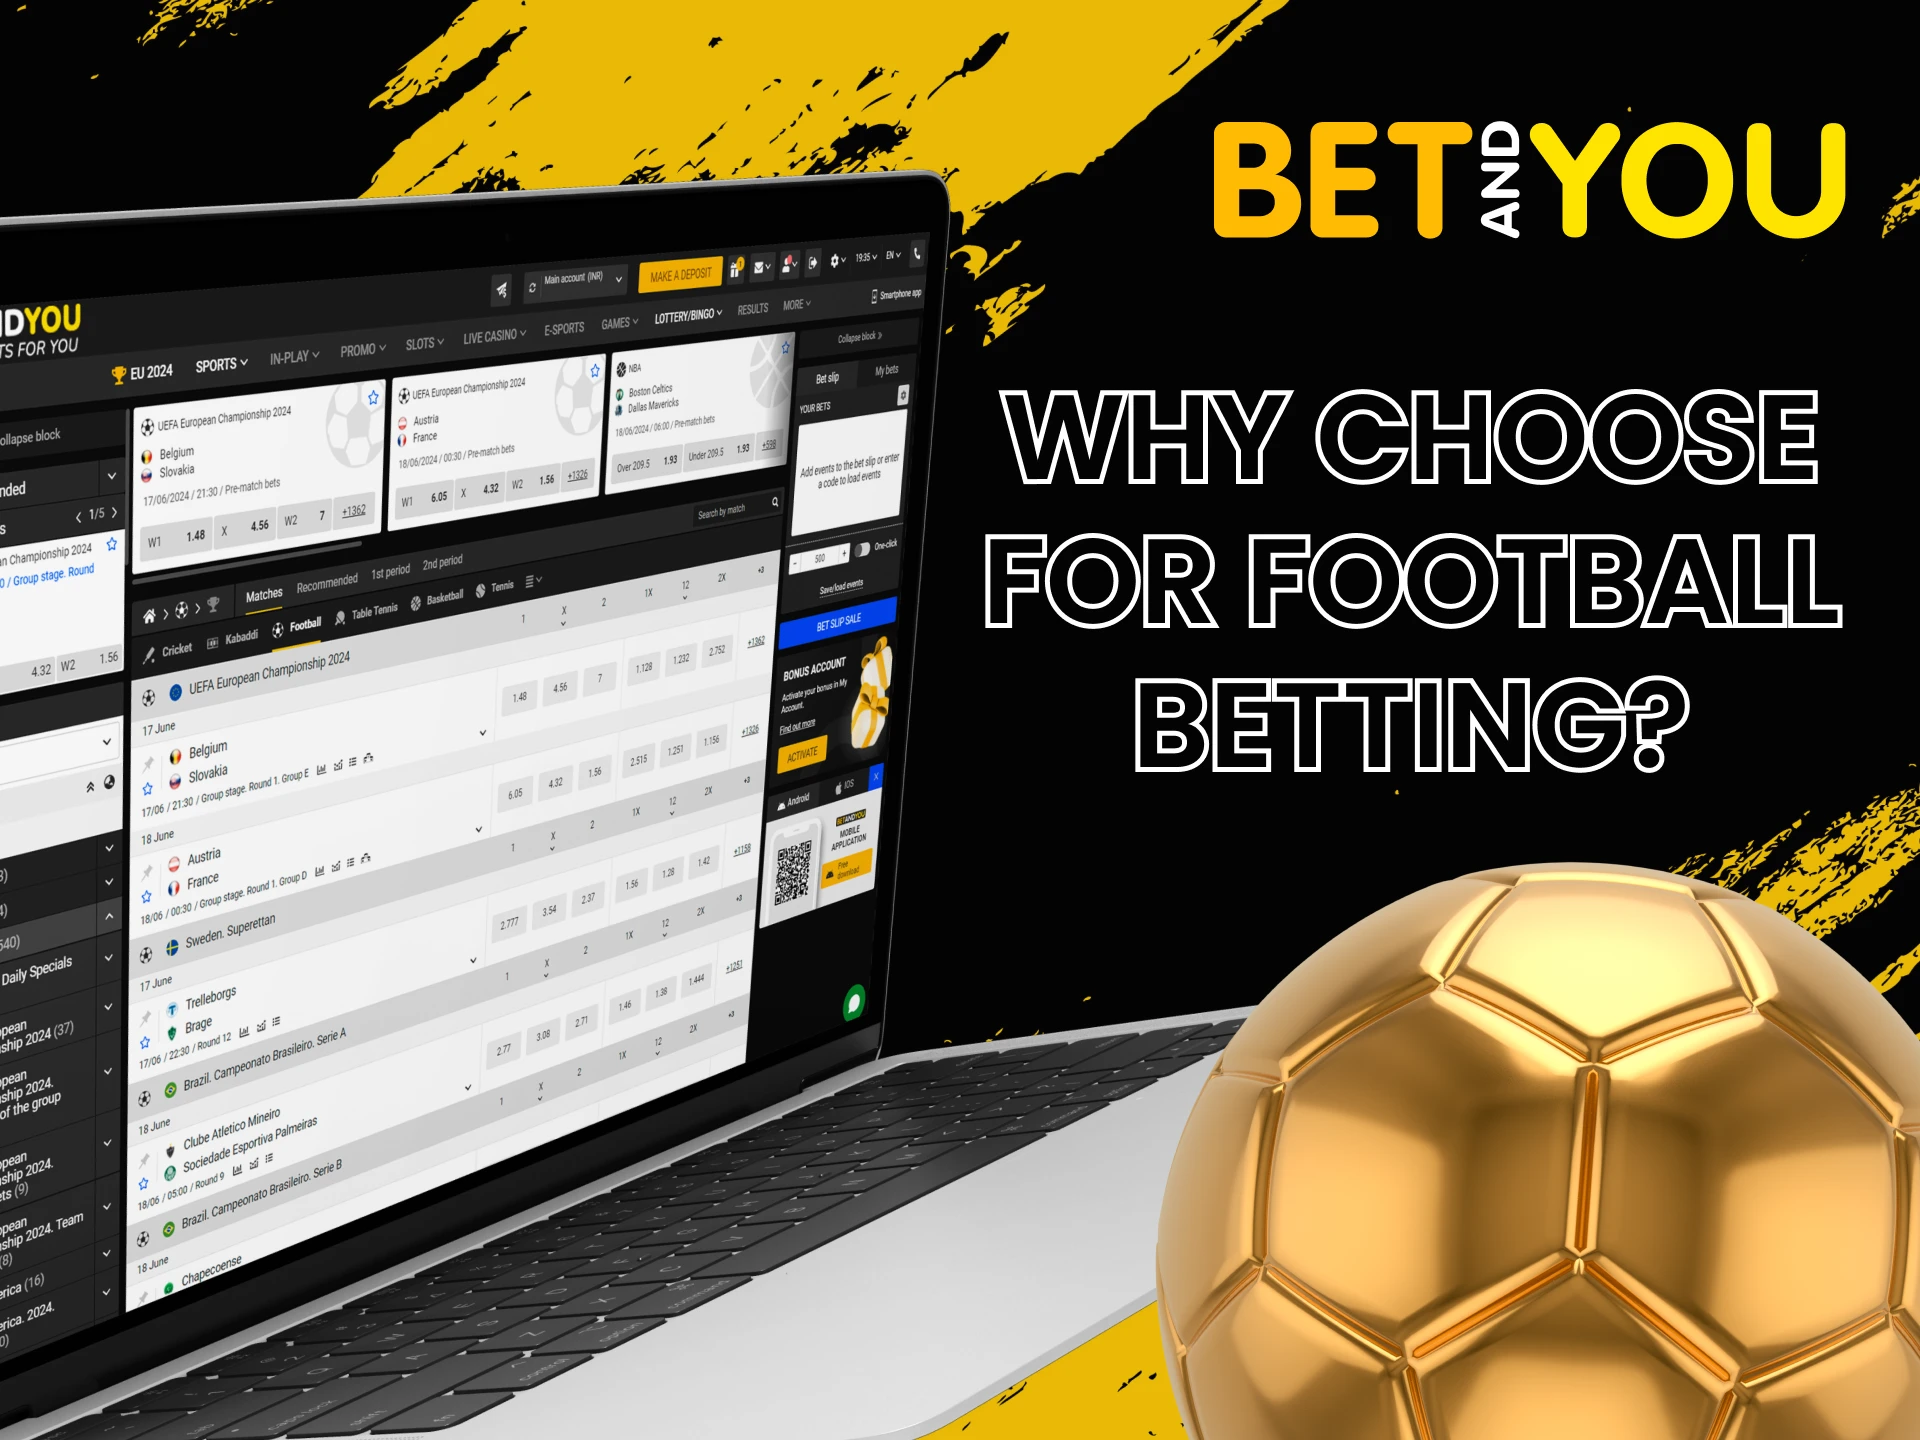 Here are the main reasons why Betandyou is a good choice for football betting.